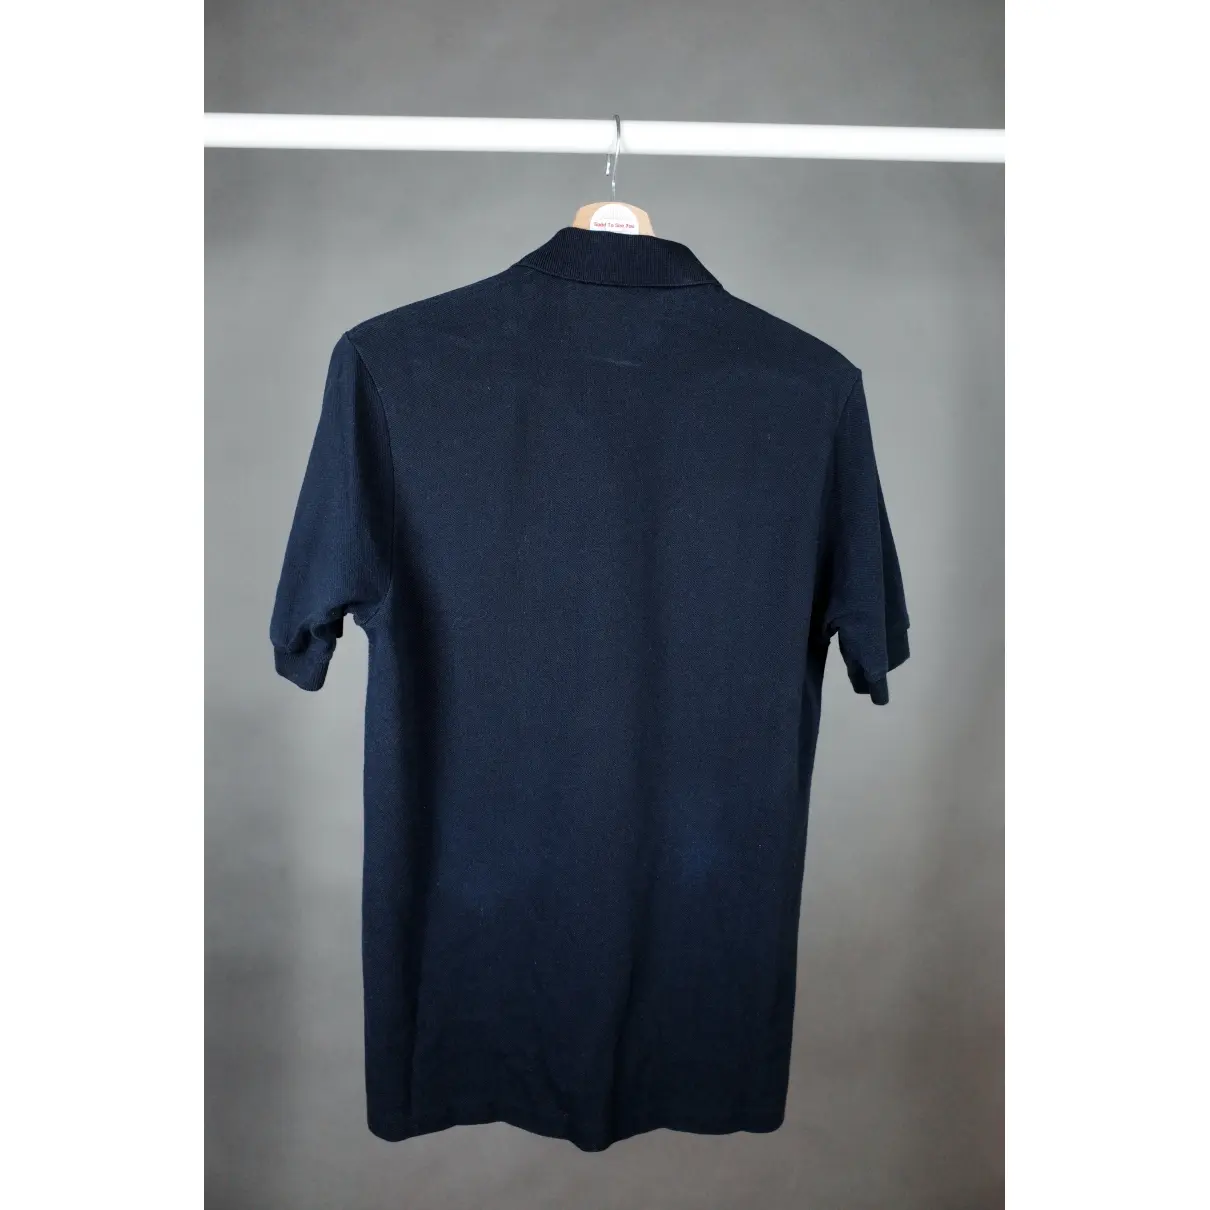 Buy Burberry Polo shirt online - Vintage